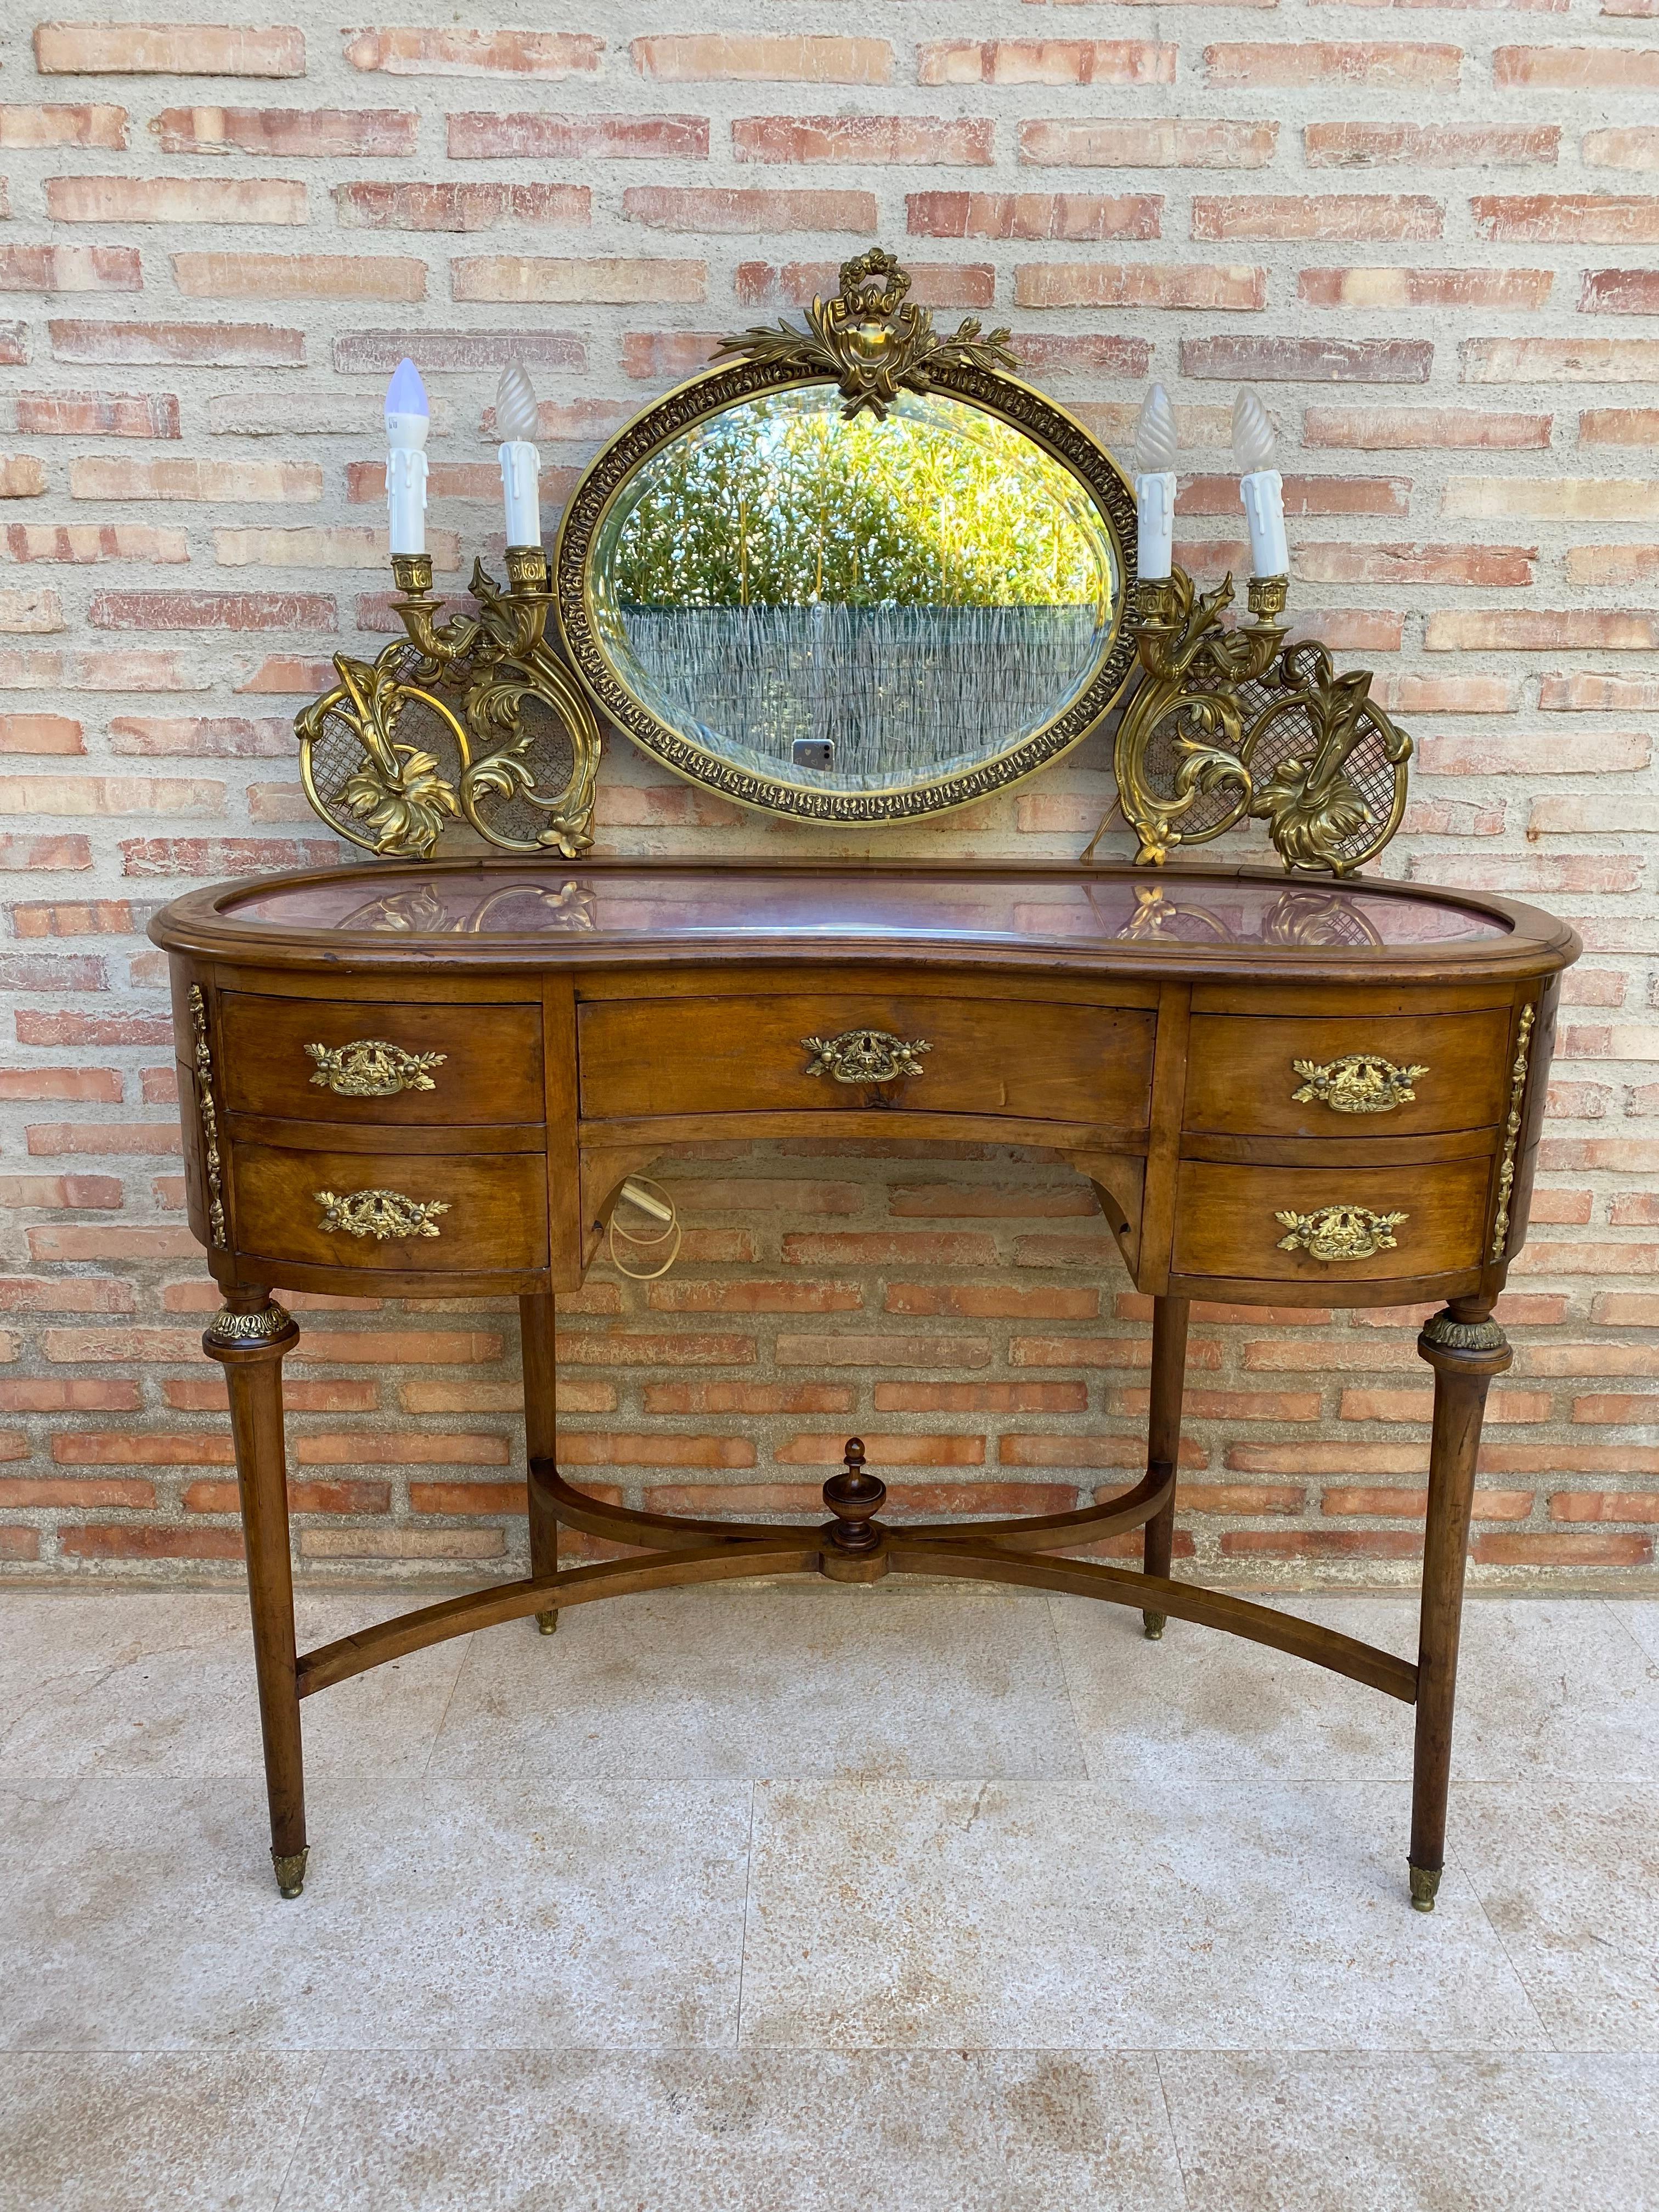 A fine French Louis XVI style dressing table with bronze decorations, having a kidney-shaped top with a gilt bronze frame and a superstructure supporting an oval mirror flanked by gilt bronze scrolled candle arms, above a drawer of central and four